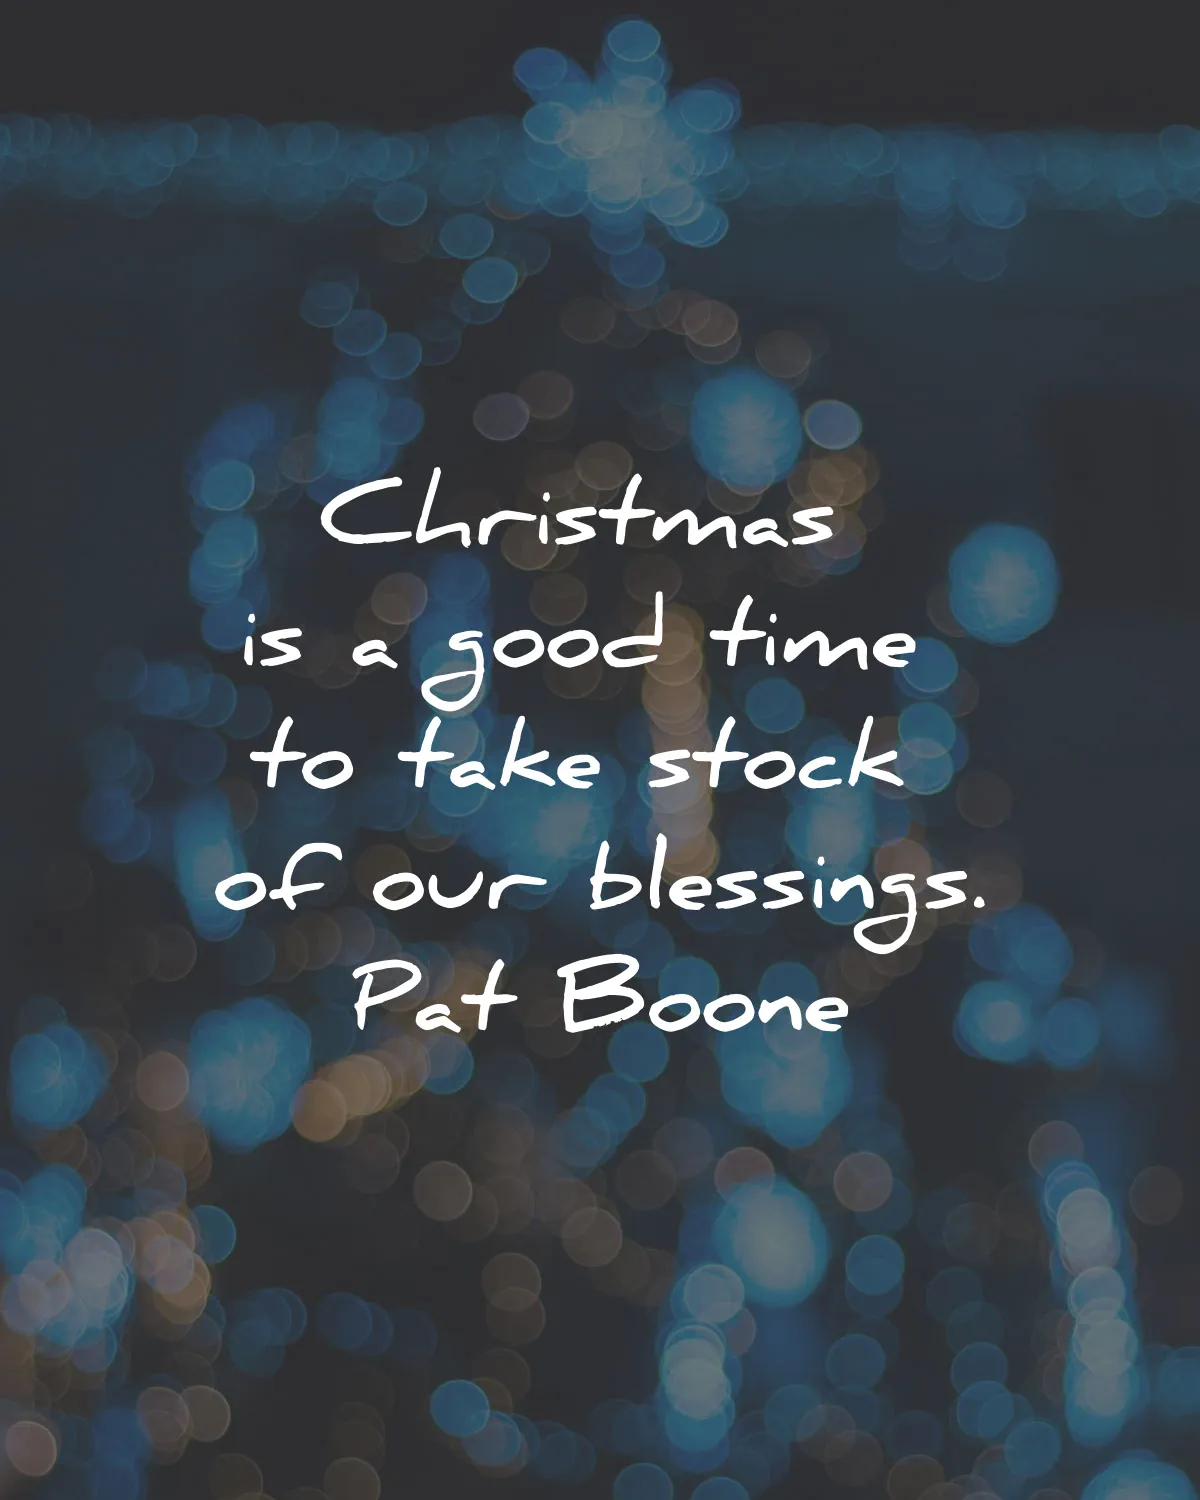 christmas quotes christmas good time take stock blessings pat boone wisdom